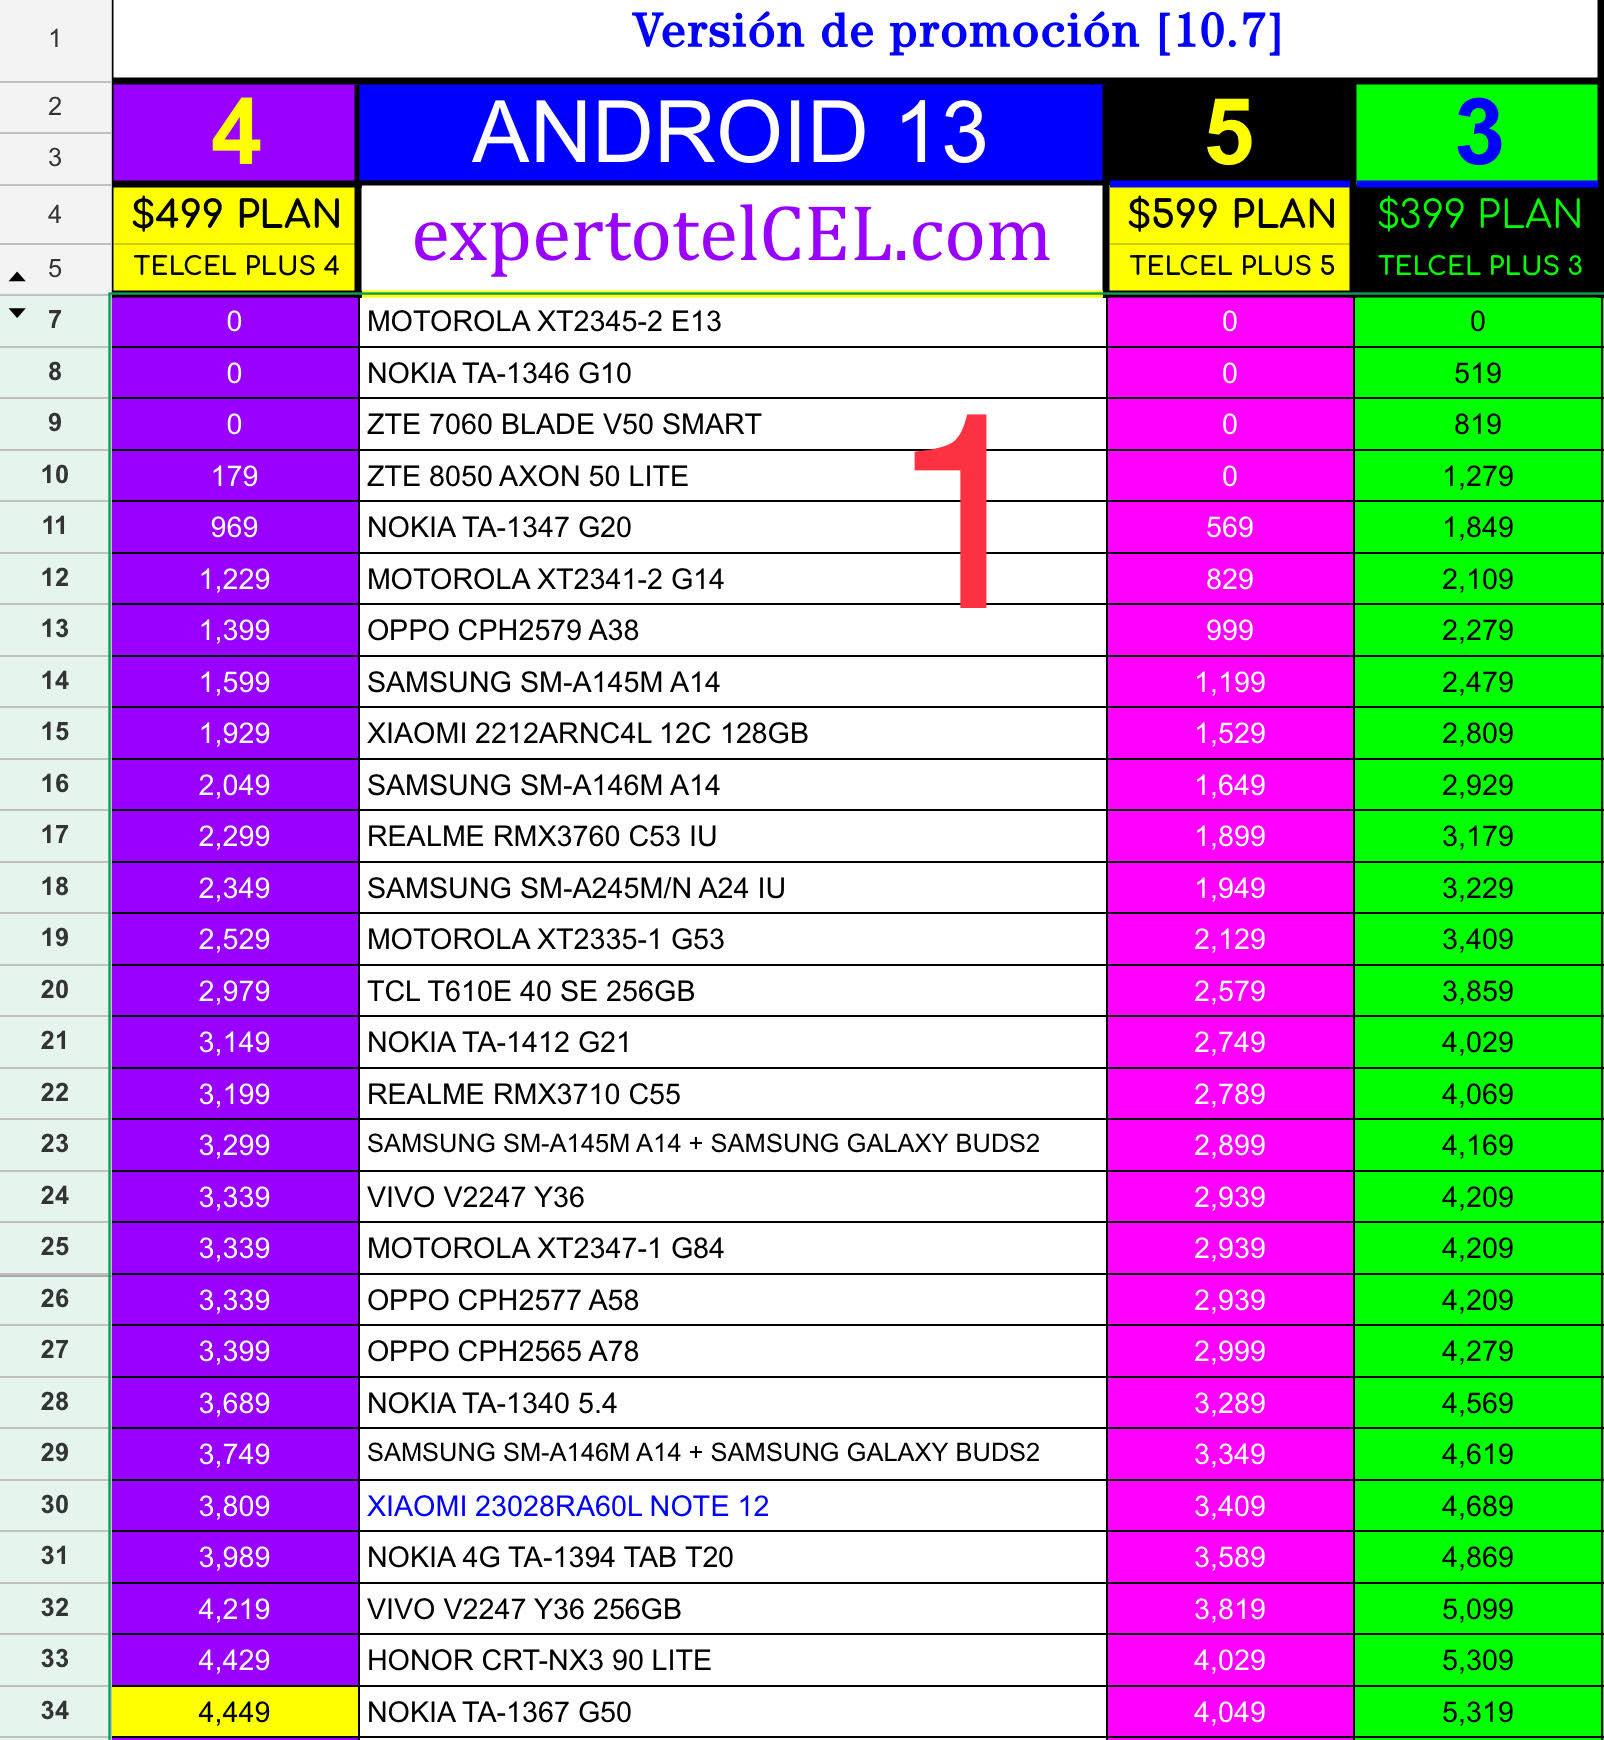 01 ANDROID 13 V10.7 23